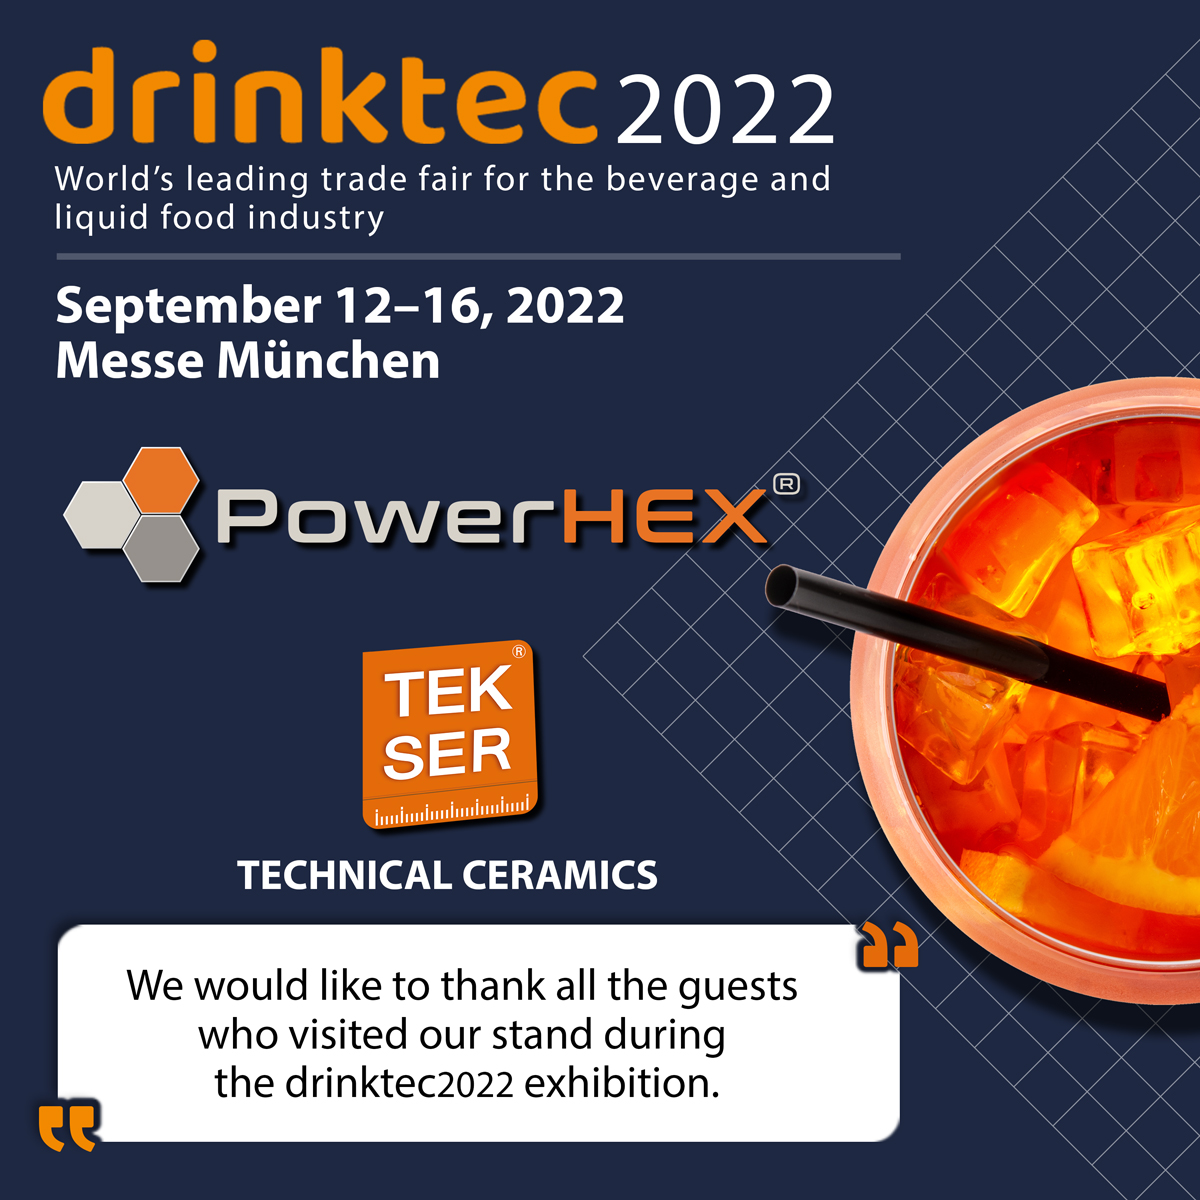 dirinktec 2022 World’s leading trade fair for the beverage and 
liquid food industry